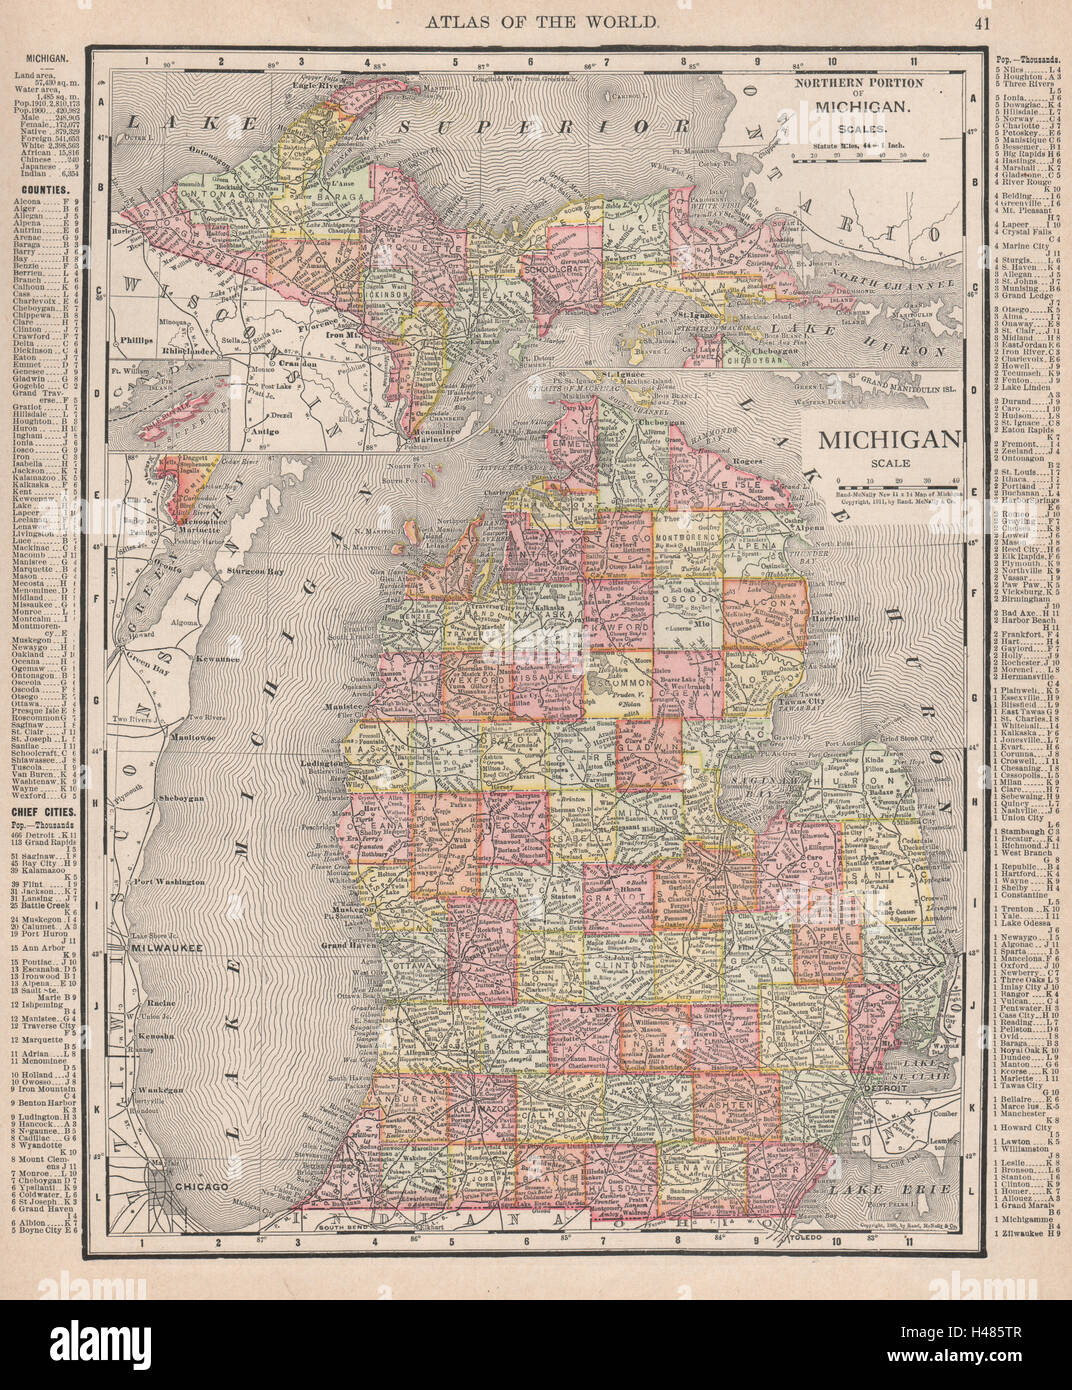 Michigan state map showing counties. RAND MCNALLY 1912 old antique chart Stock Photo